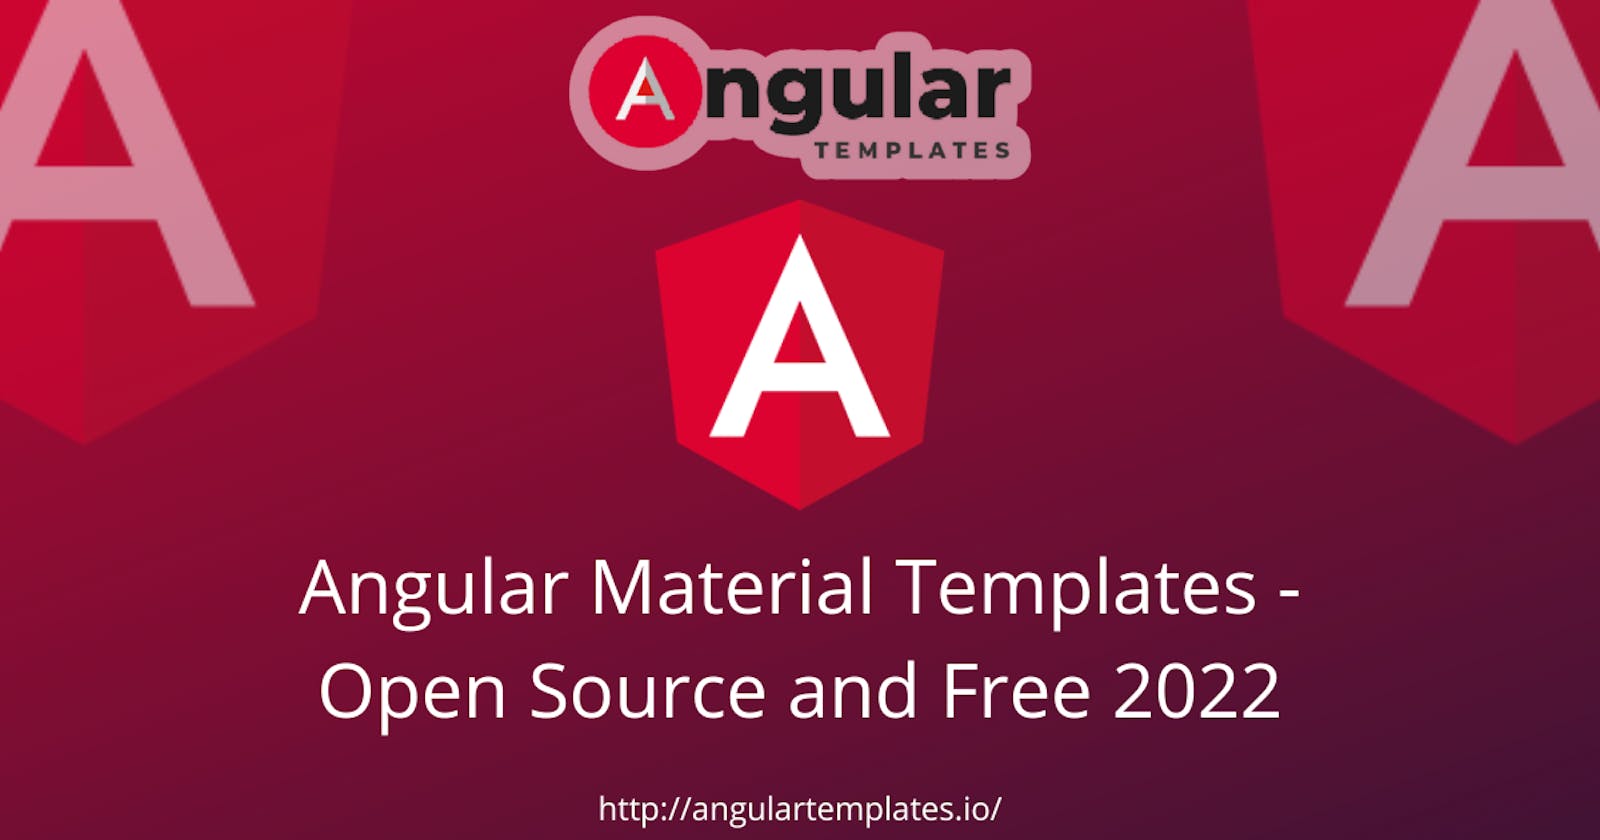 Angular Material Templates - Open Source and Free 2022